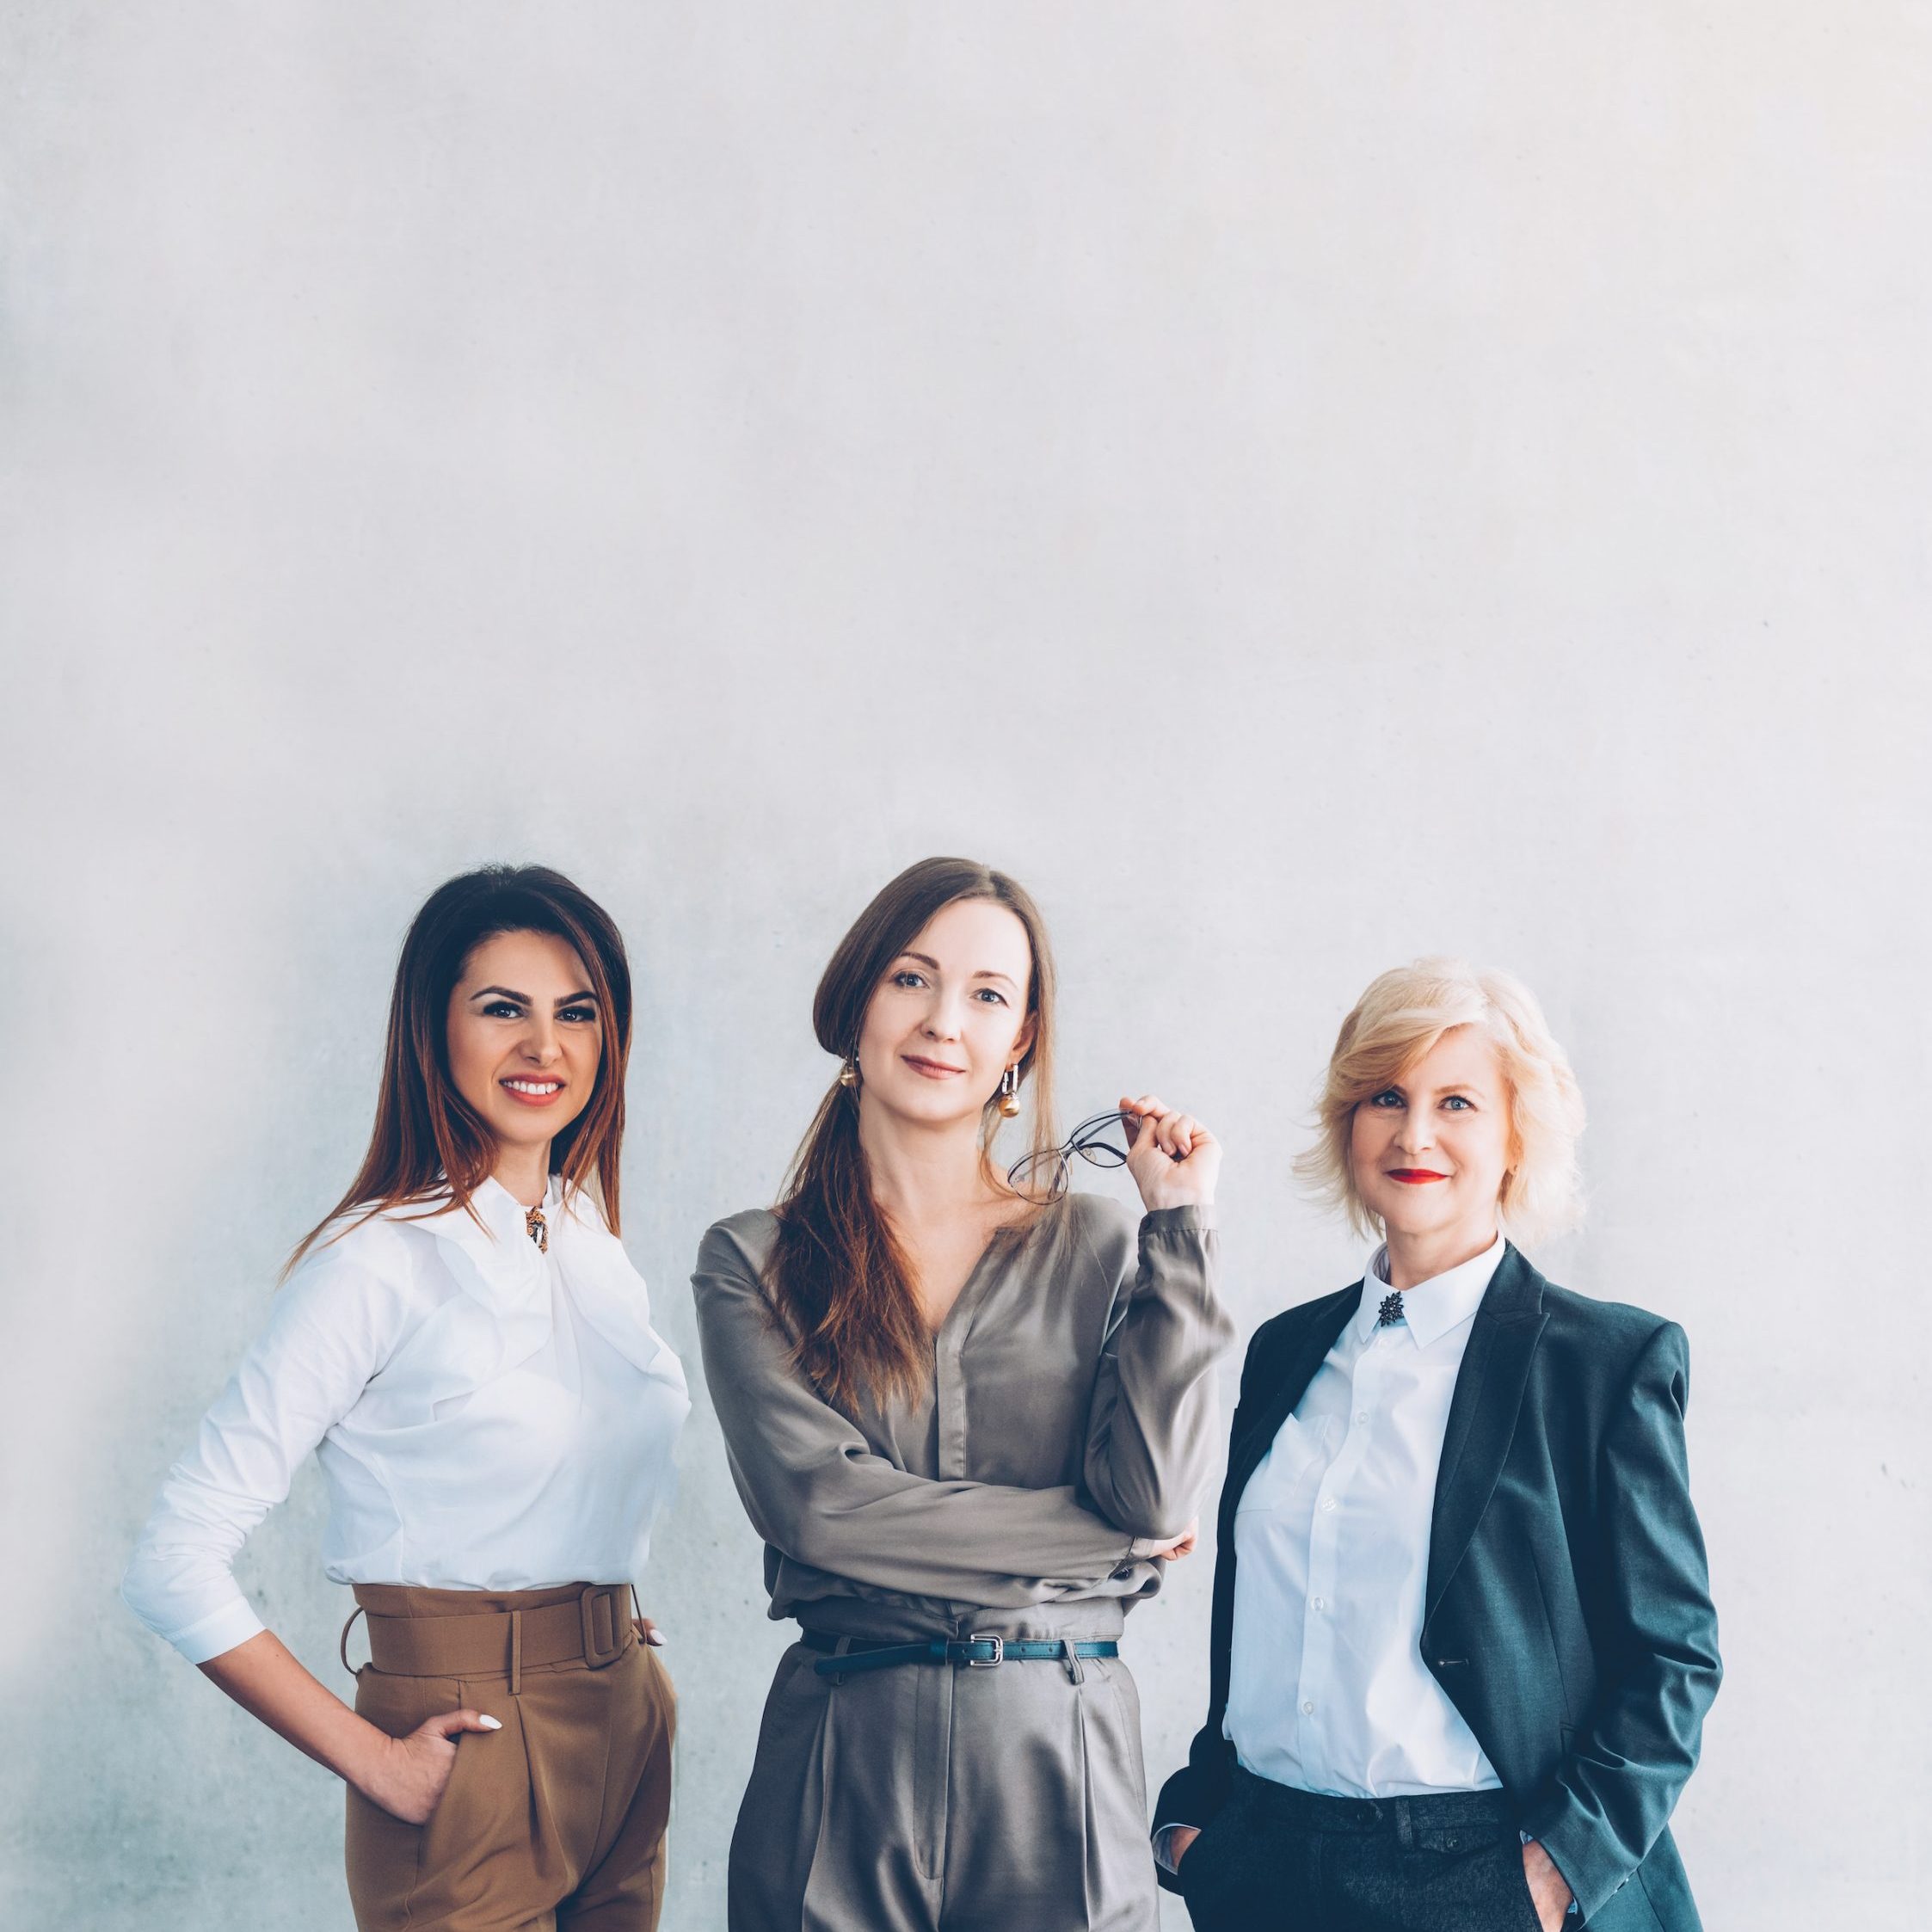 Female oriented company. Power strength intelligence. Three confident business women.